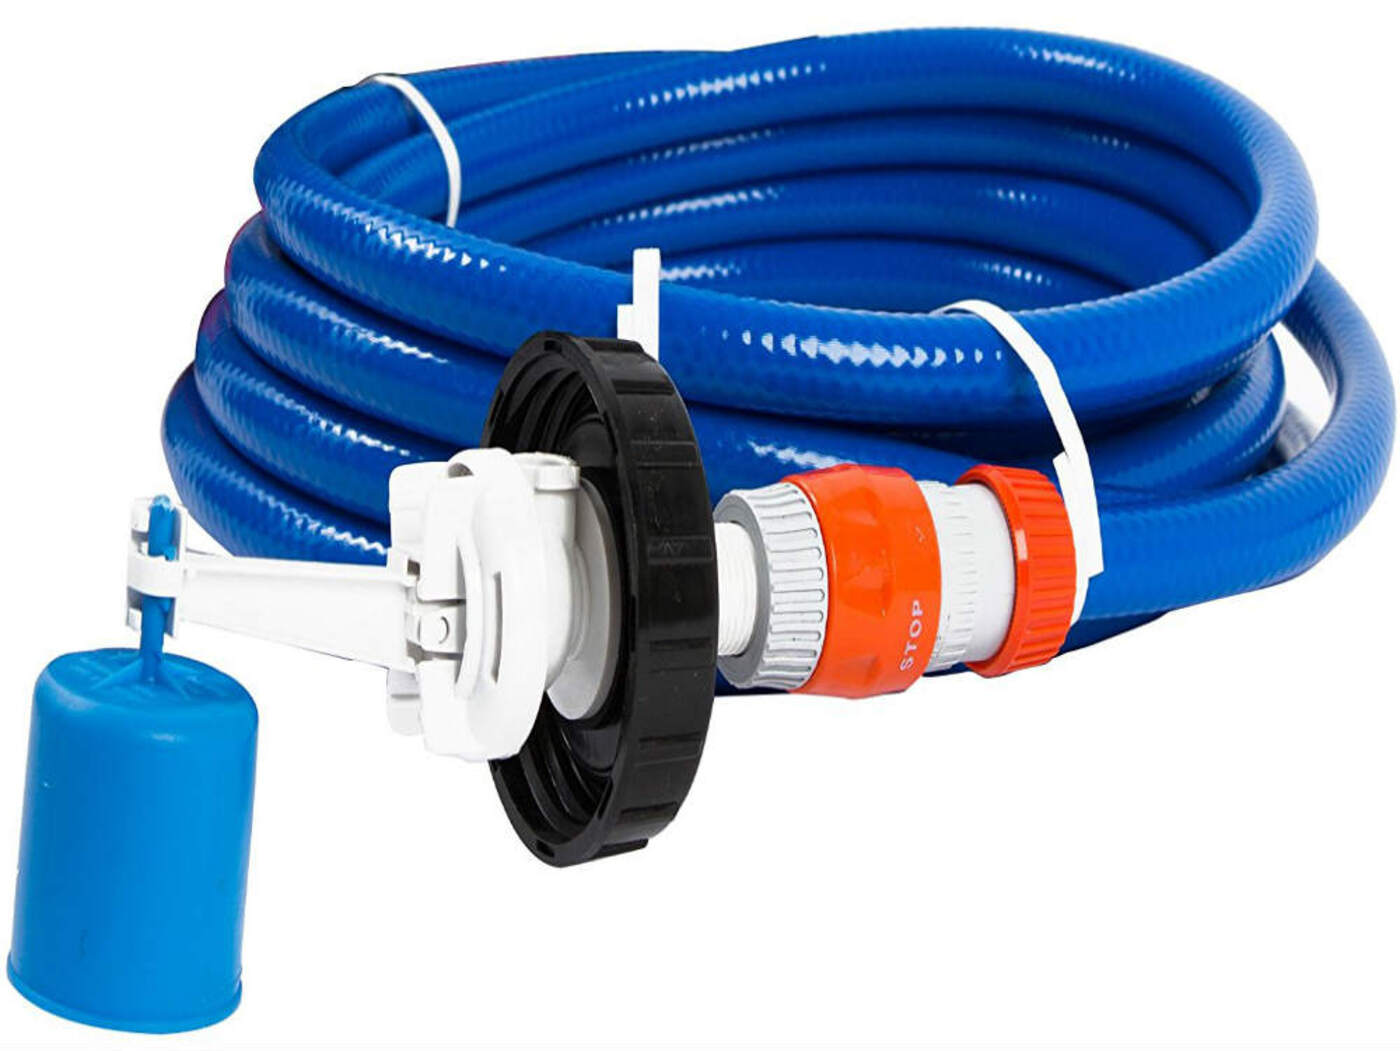 Caravan universal FLAT HOSE KIT 7.5 metres autofill Mains Water adaptor for AQUAROLL AND SUPERPITCH fast postage lz 